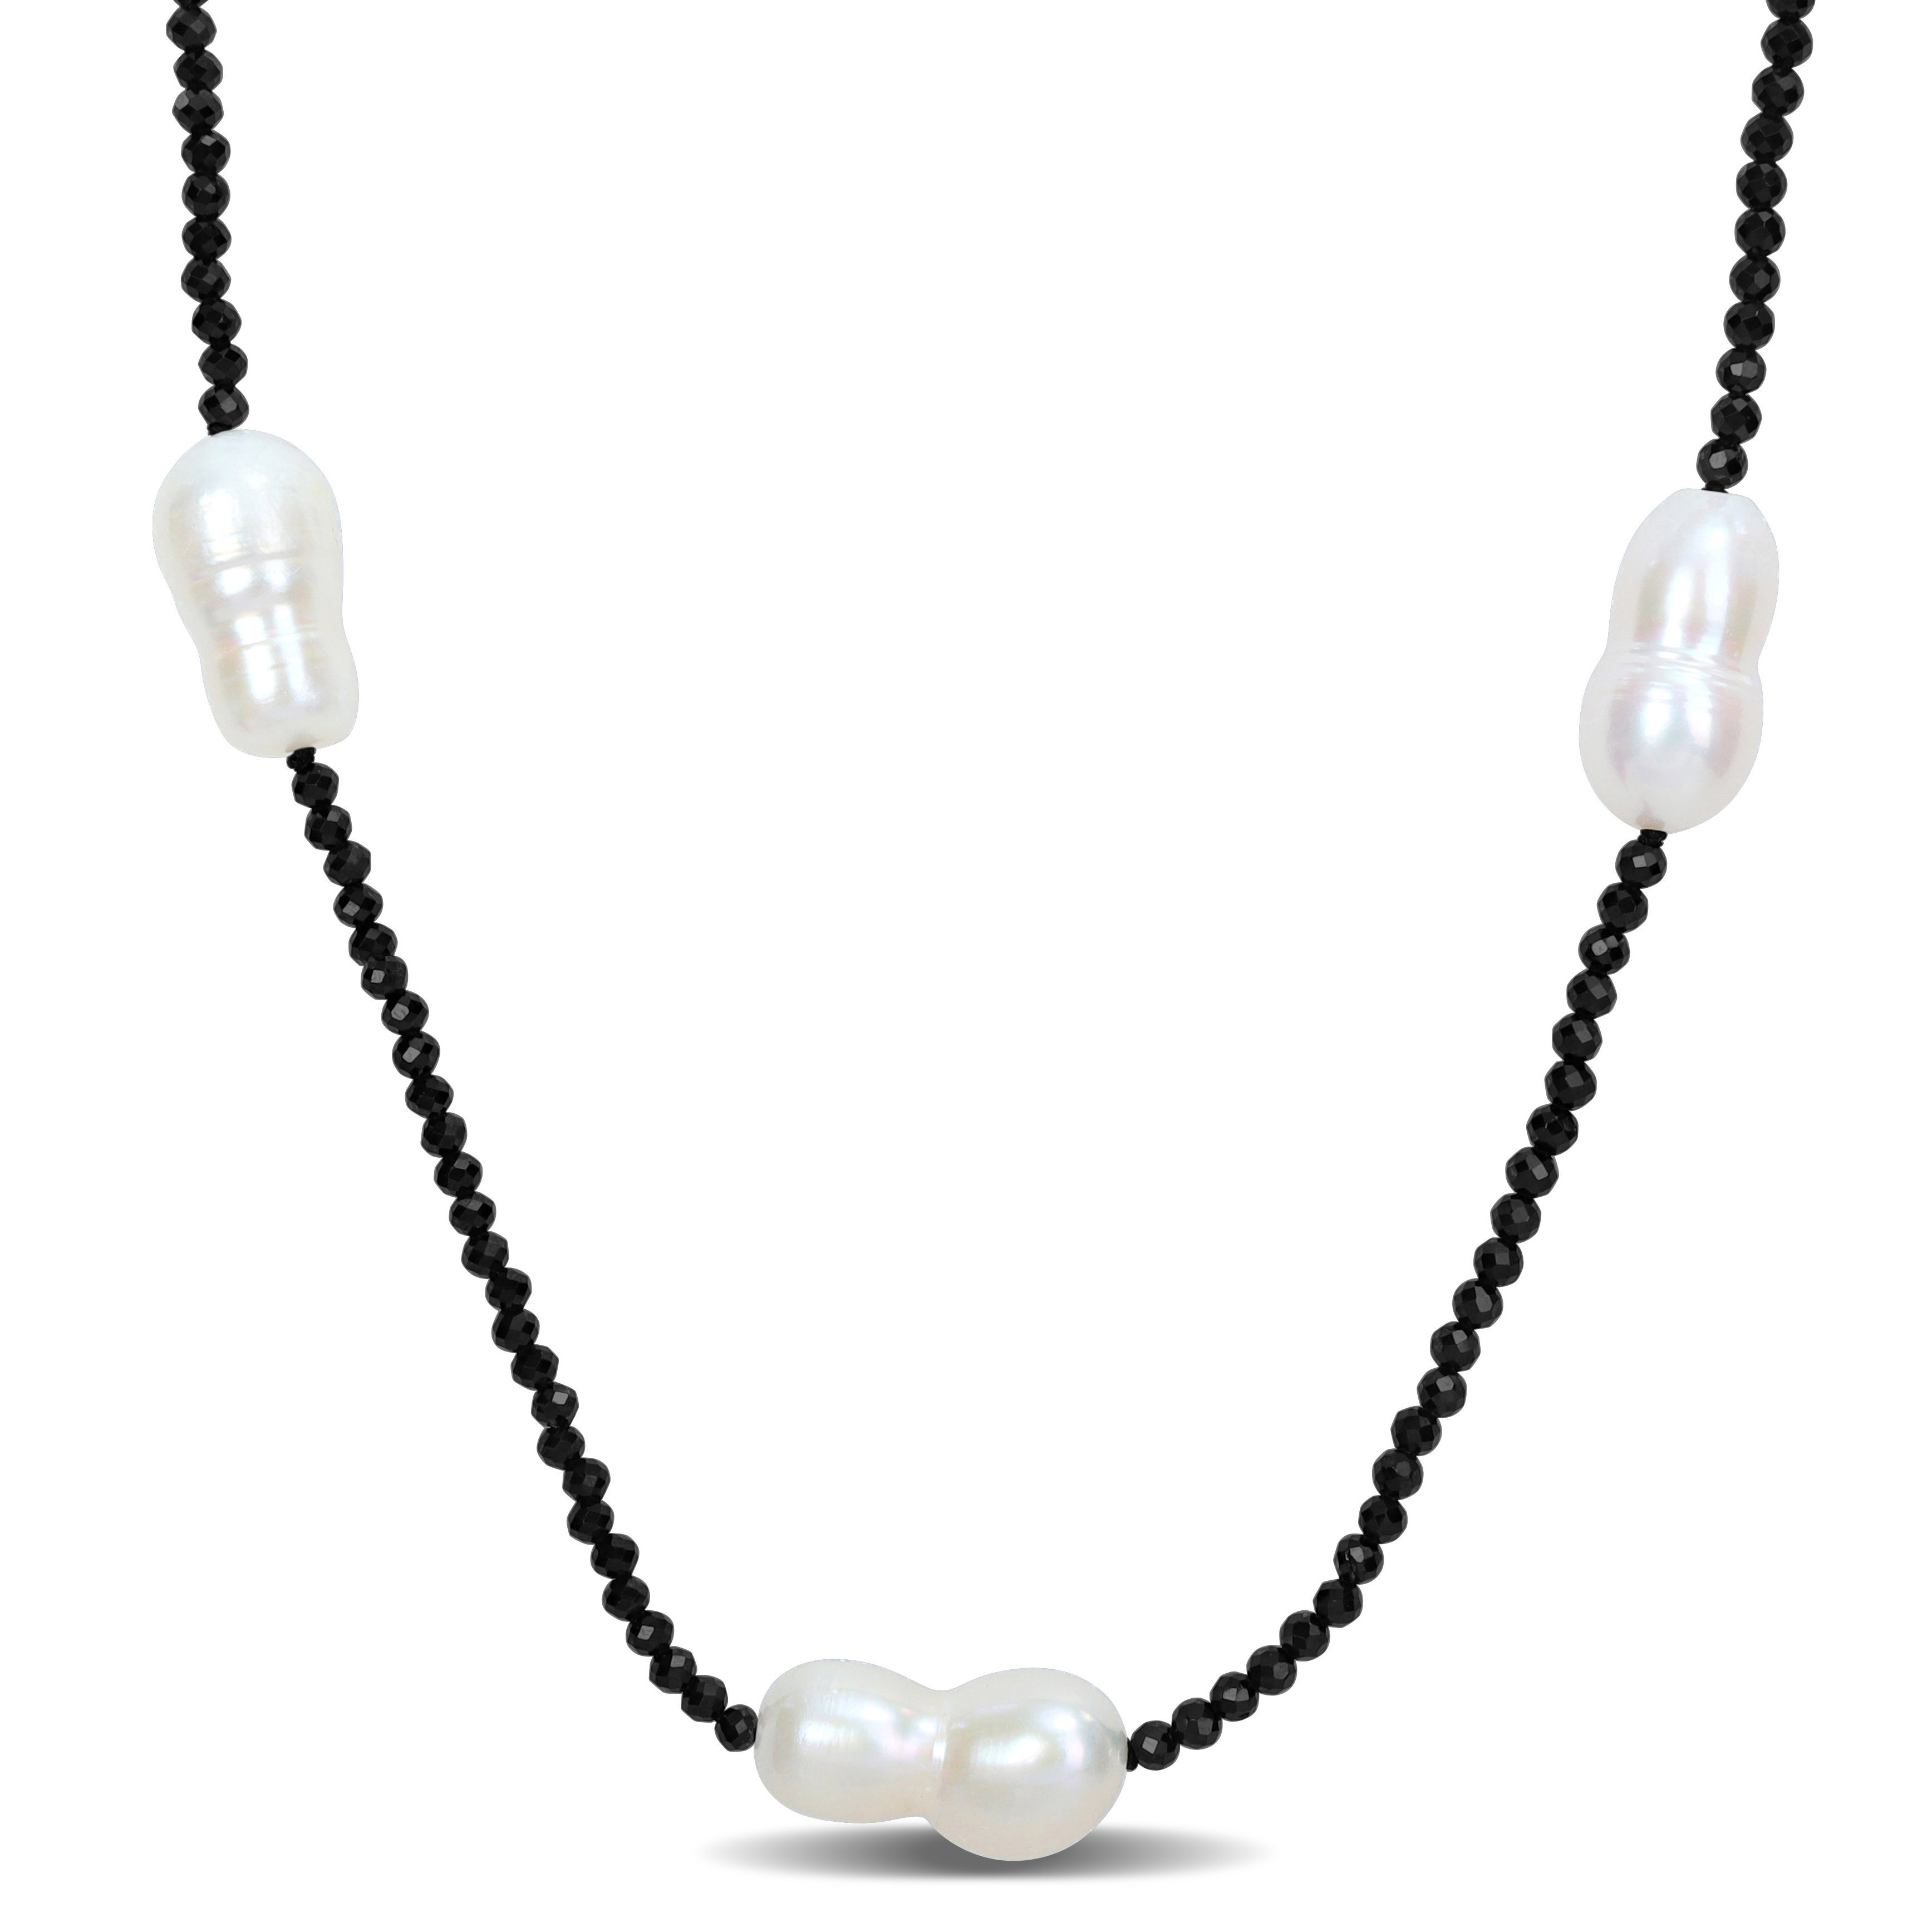 12-14 MM Cultured Freshwater Pearl and Black Spinel Station Layering Necklace - 32 in.